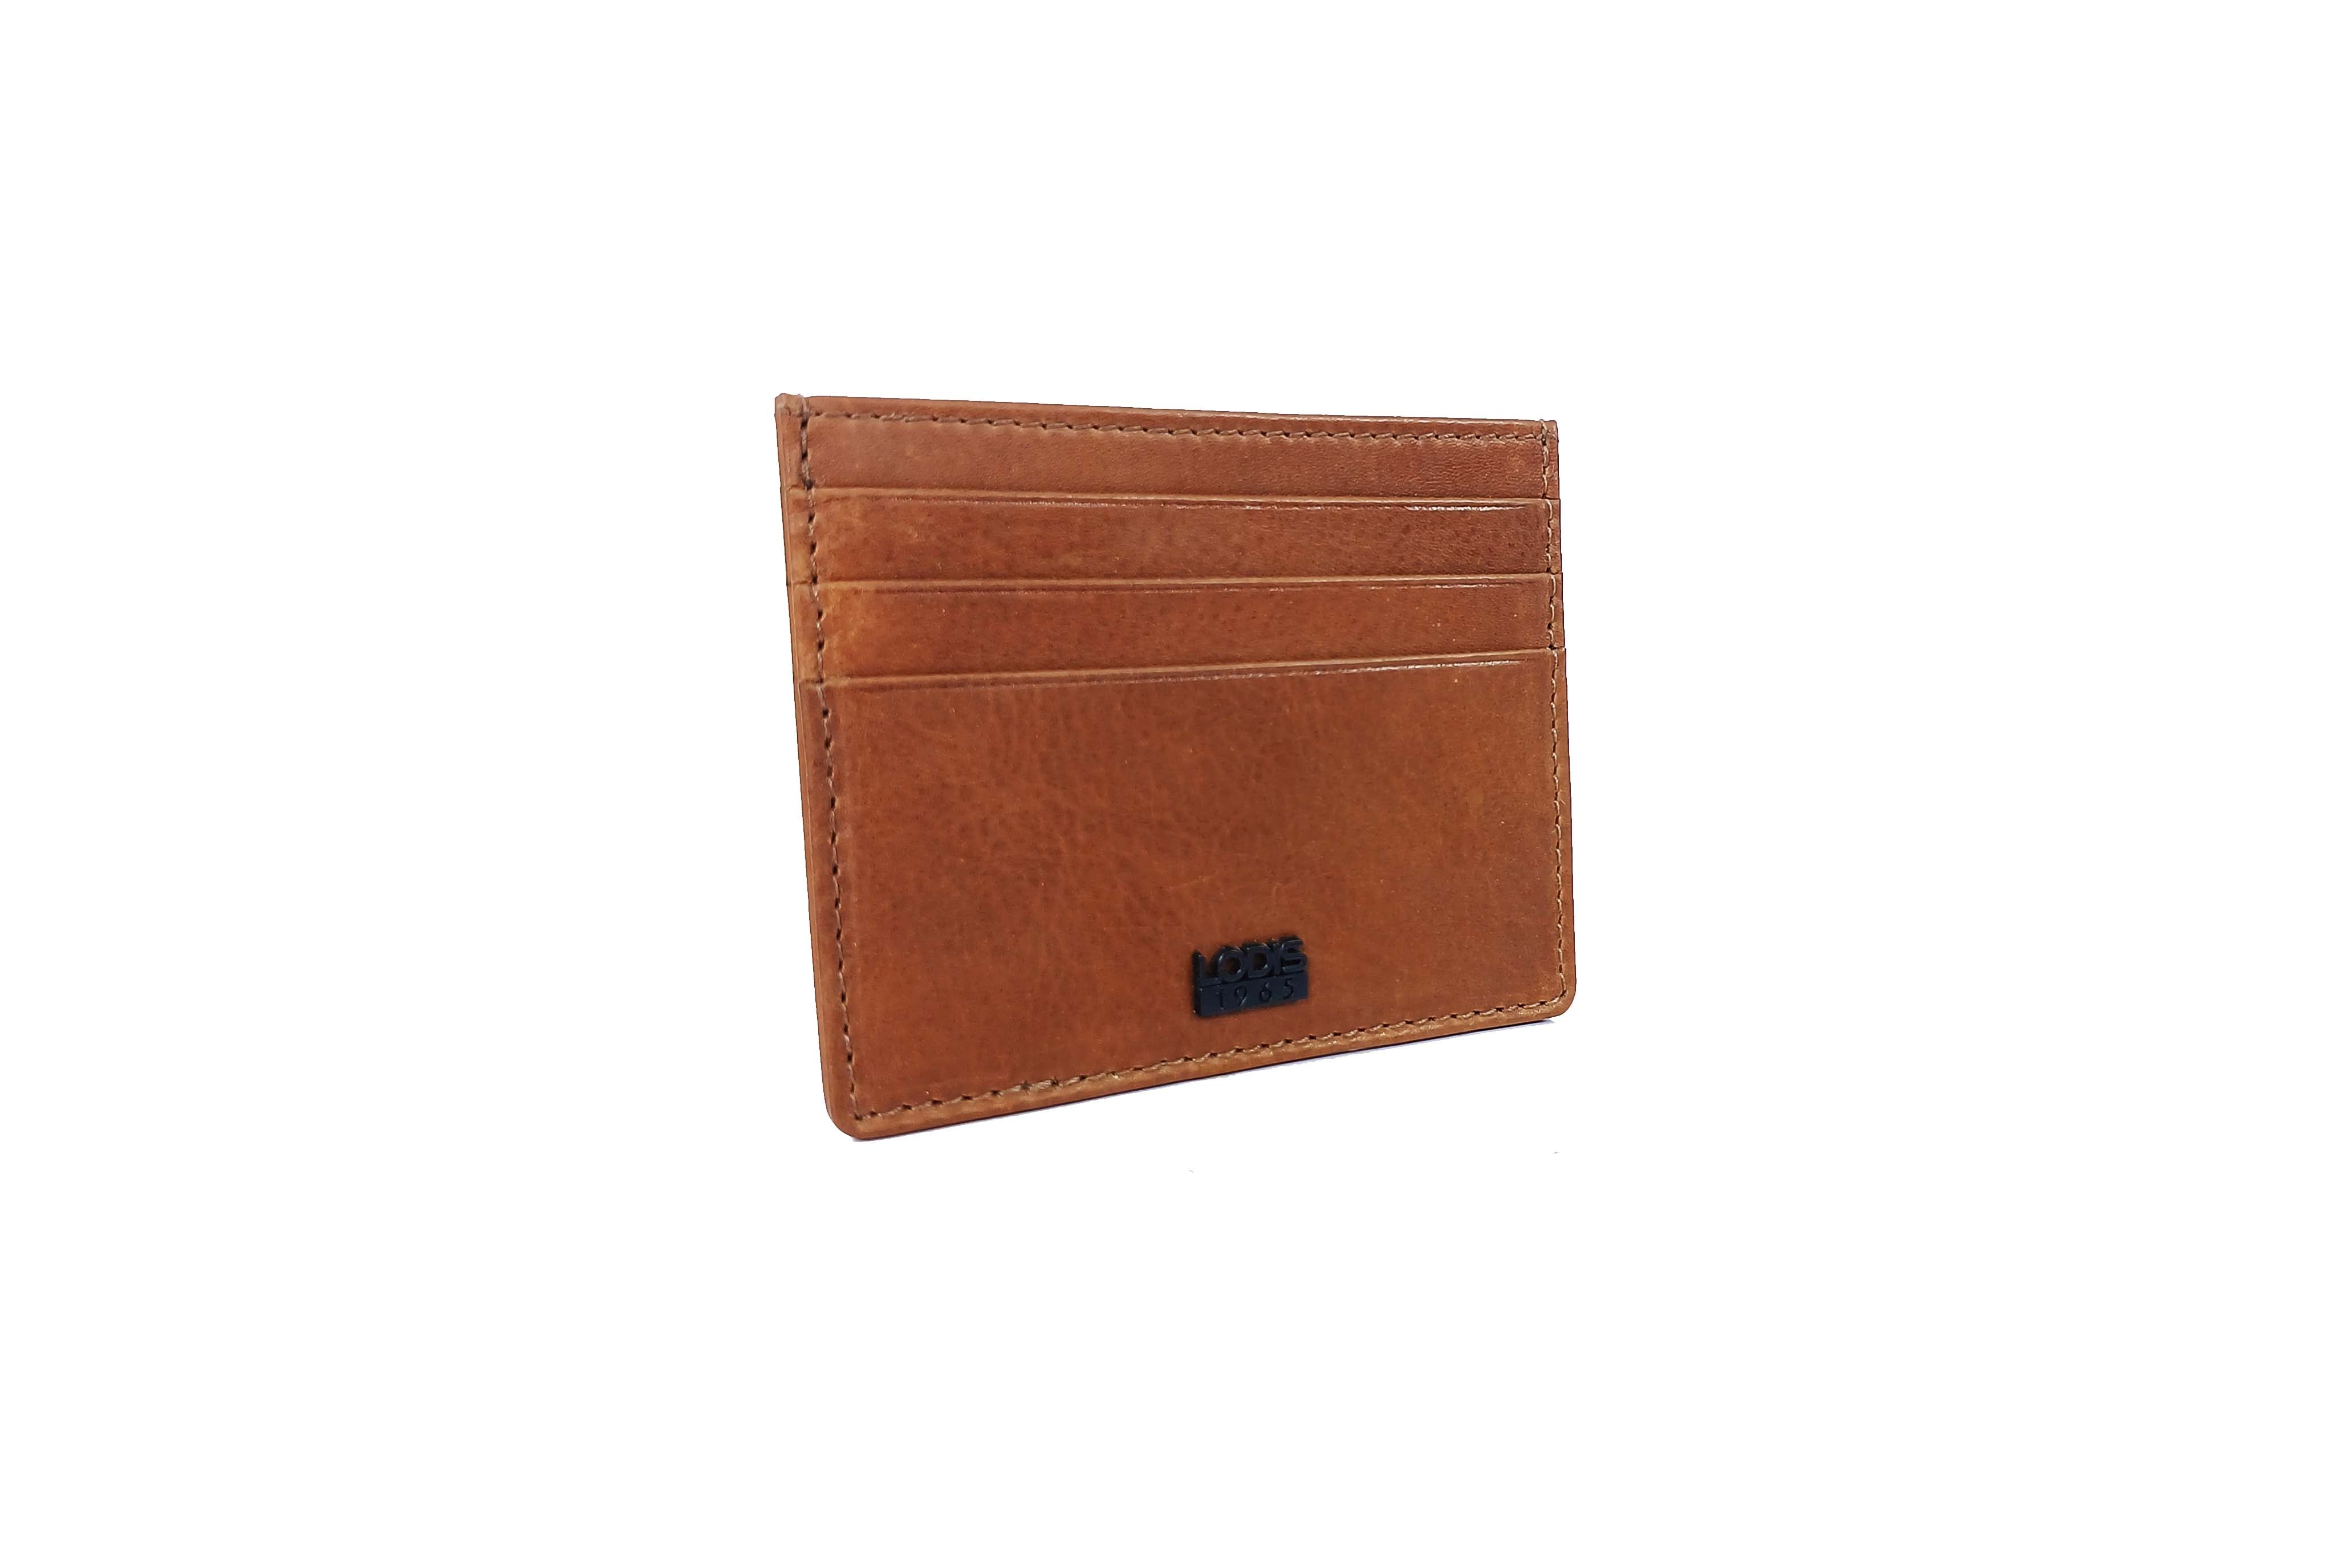 Buy Now The  Essentials with Stylish Men's Card Cases and Holders at Lodis